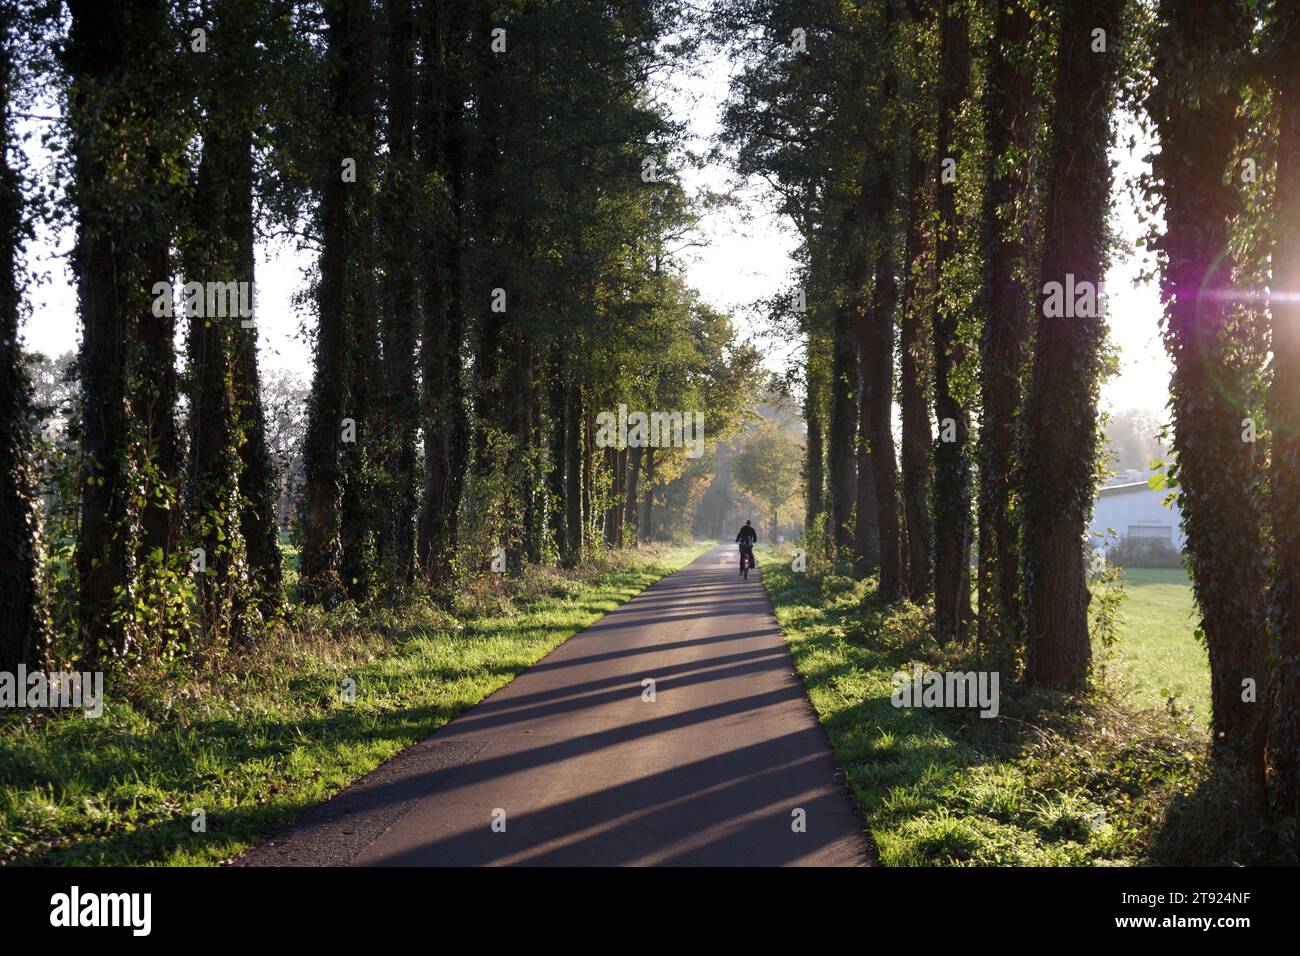 Road, cyclist, shadow, trees, sunlight, landscape, Germany, The low autumn sun casts shadows from the trees onto the asphalt. A lone cyclist rides Stock Photo